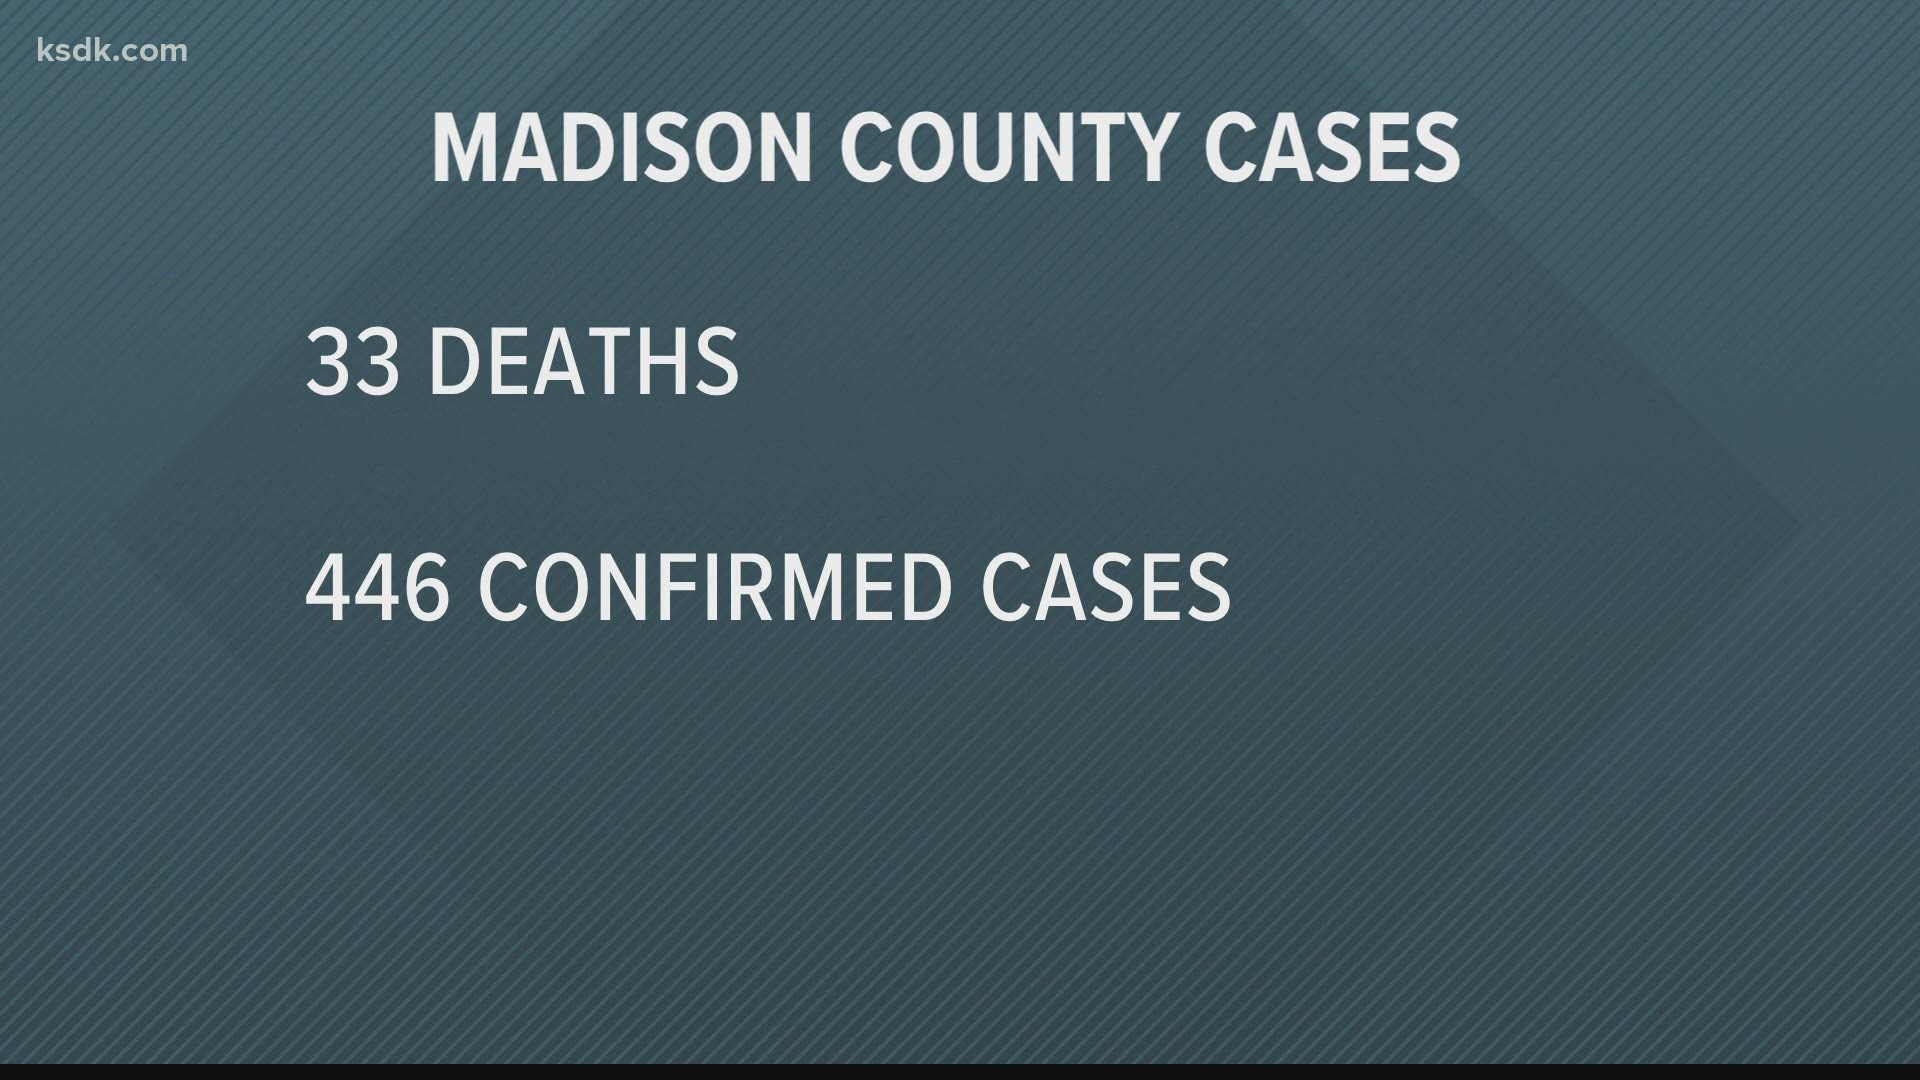 All but two of the 29 members of the Madison County Board voted to reopen.